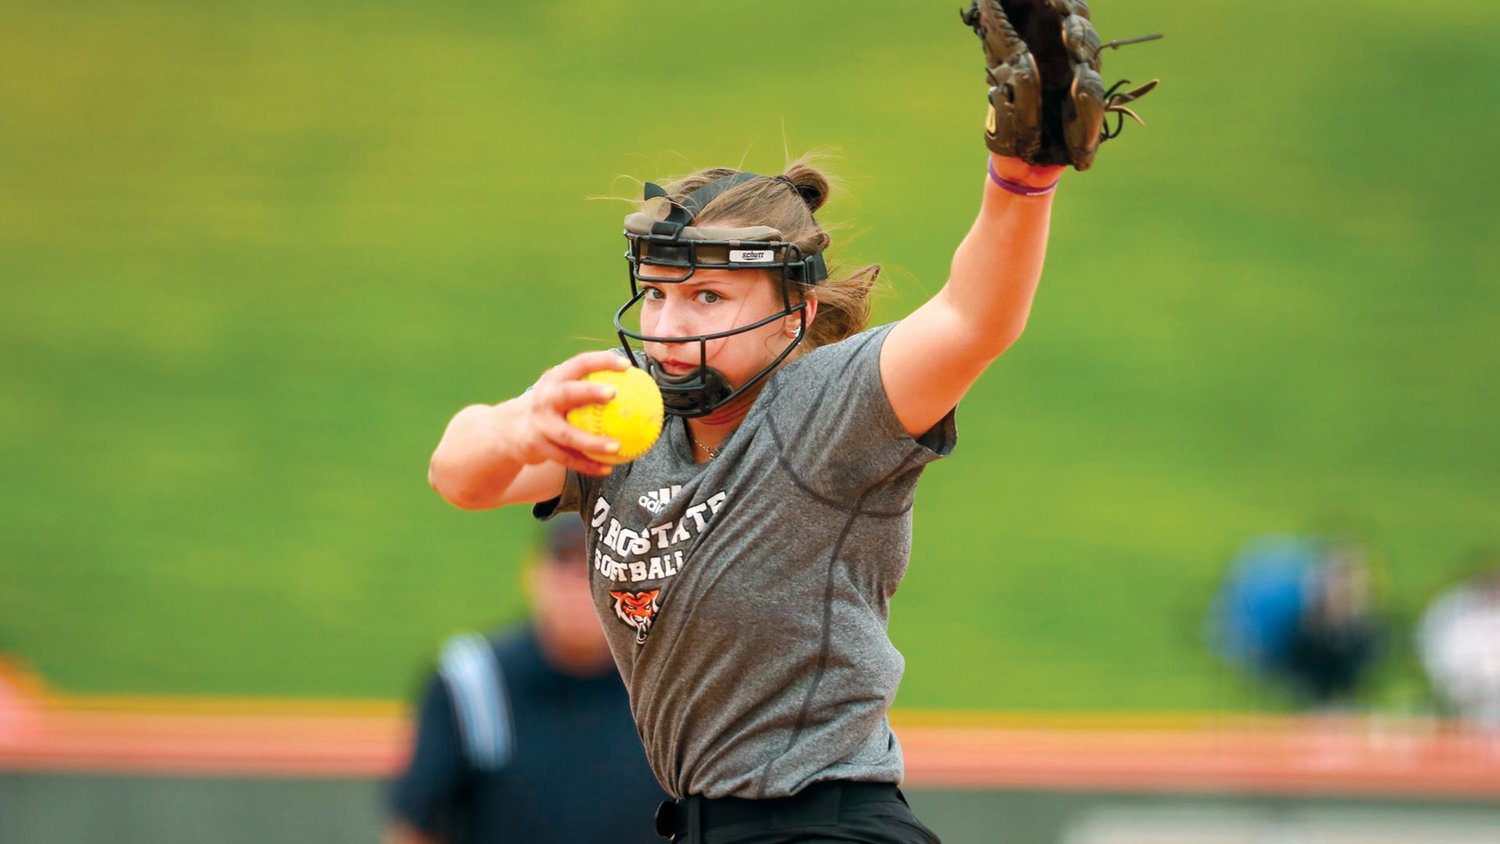 Haley Rainey pitches for Idaho State during a 2022 softball game.